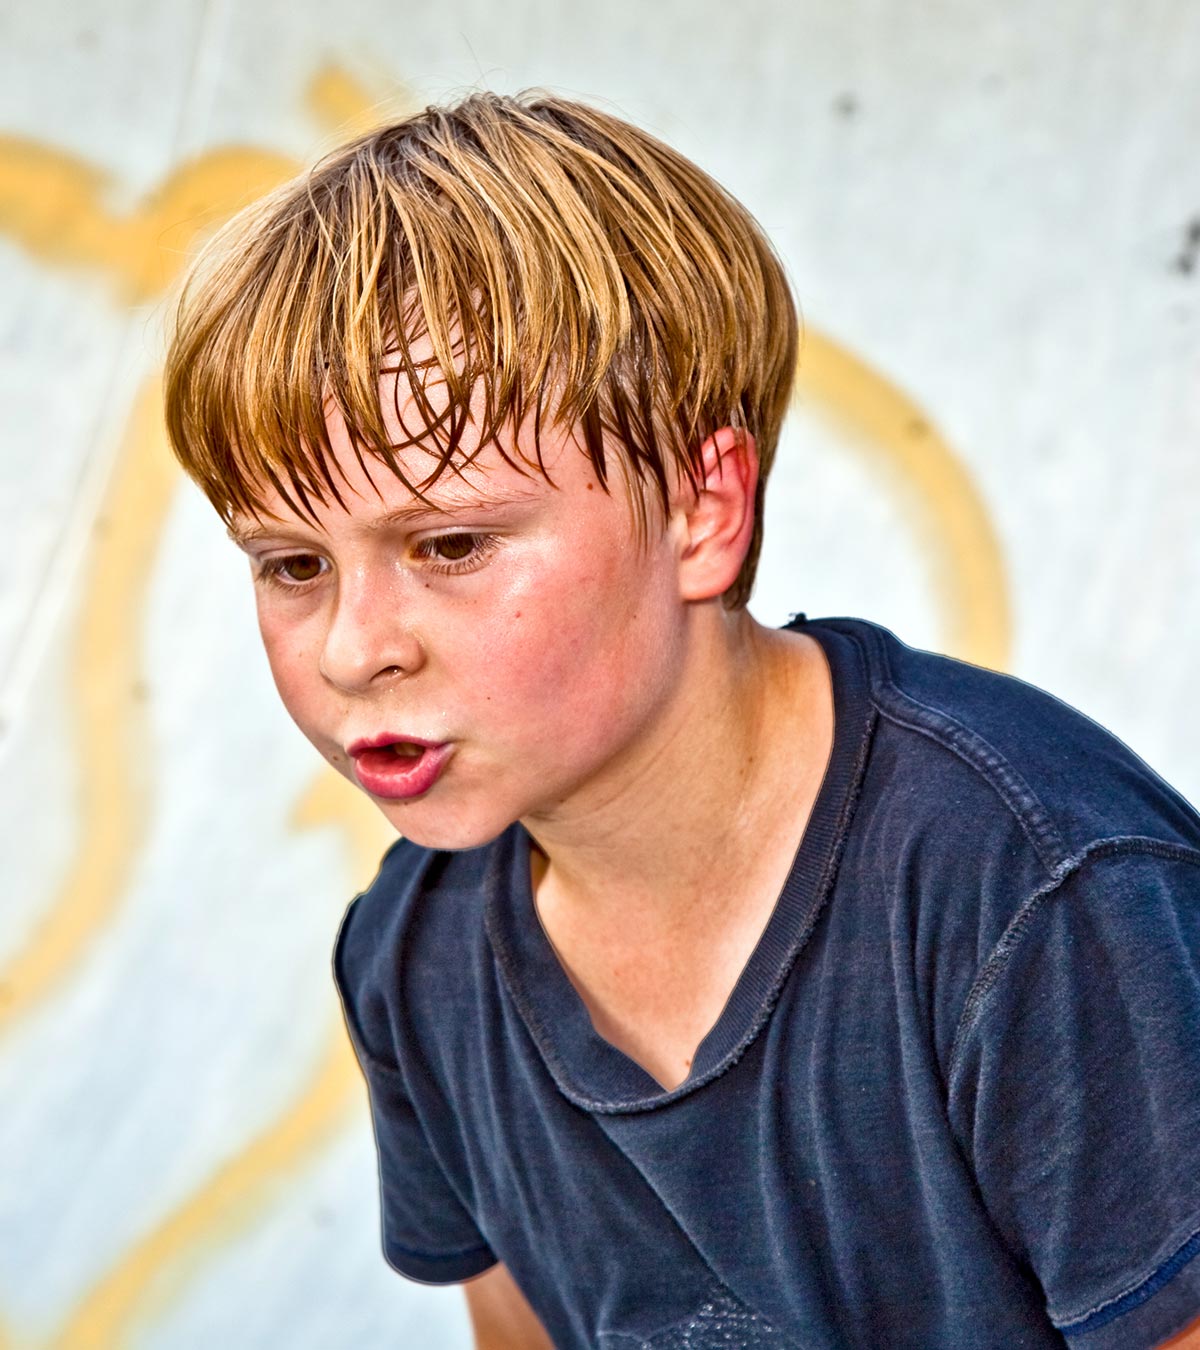 8 Causes Of Excessive Sweating (Hyperhidrosis) In Children